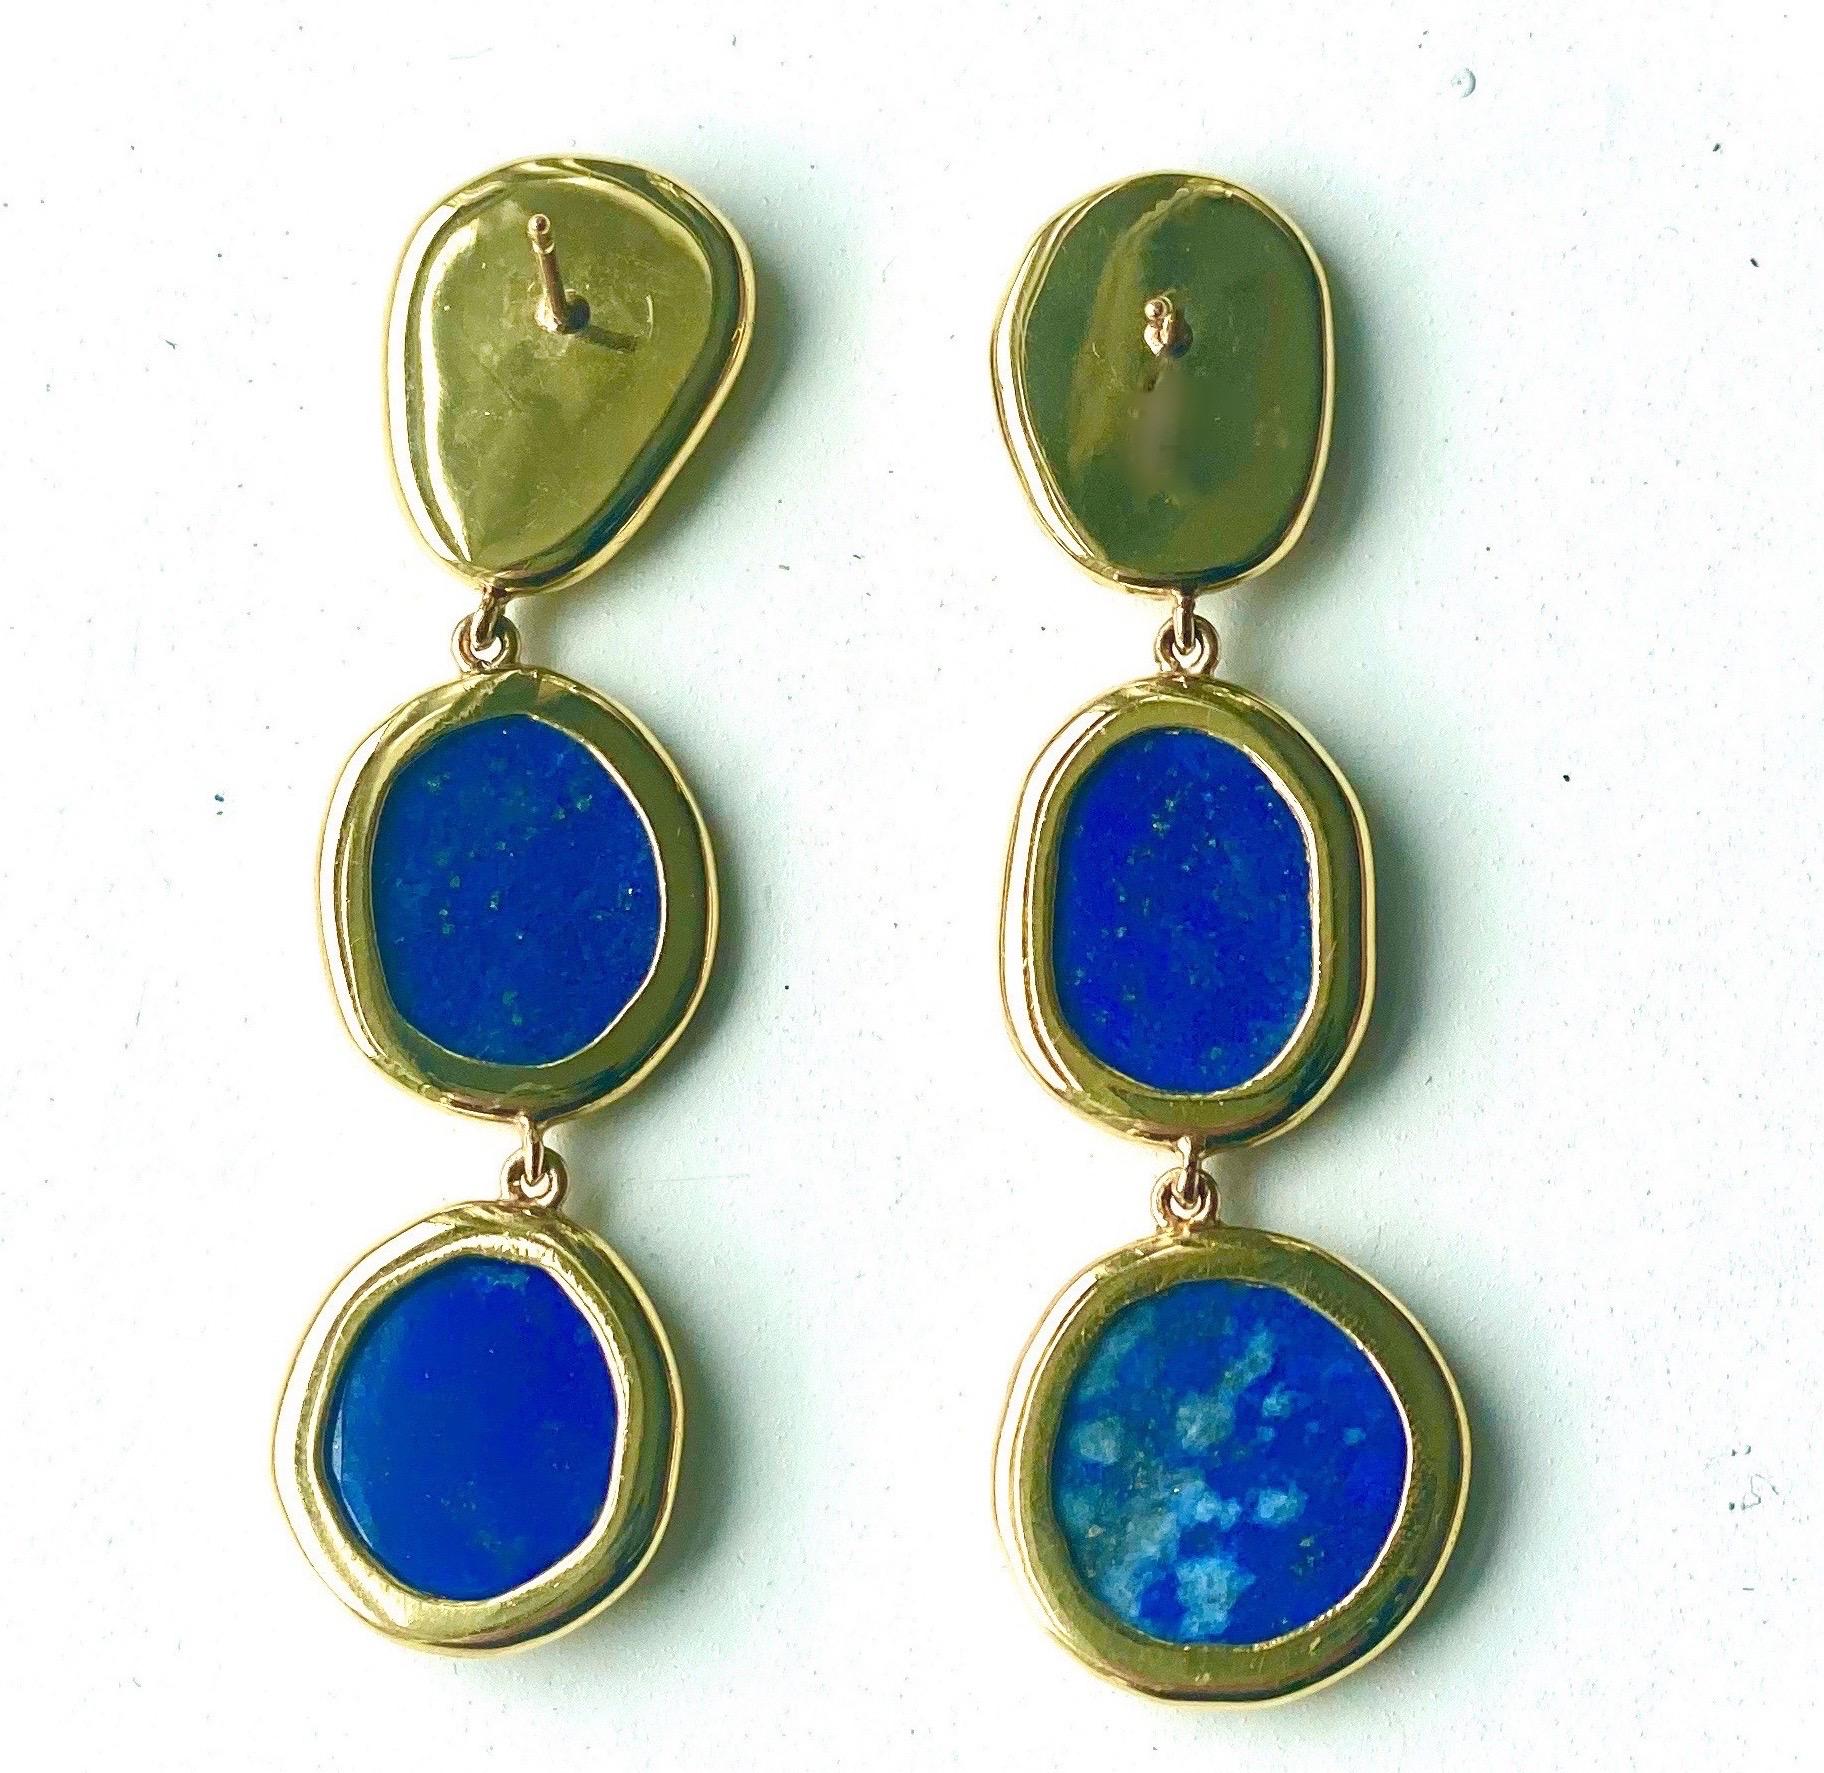 Lyn's Jewelry Lapis Amethyst and Malachite Drop Earrings Silver or Gold 